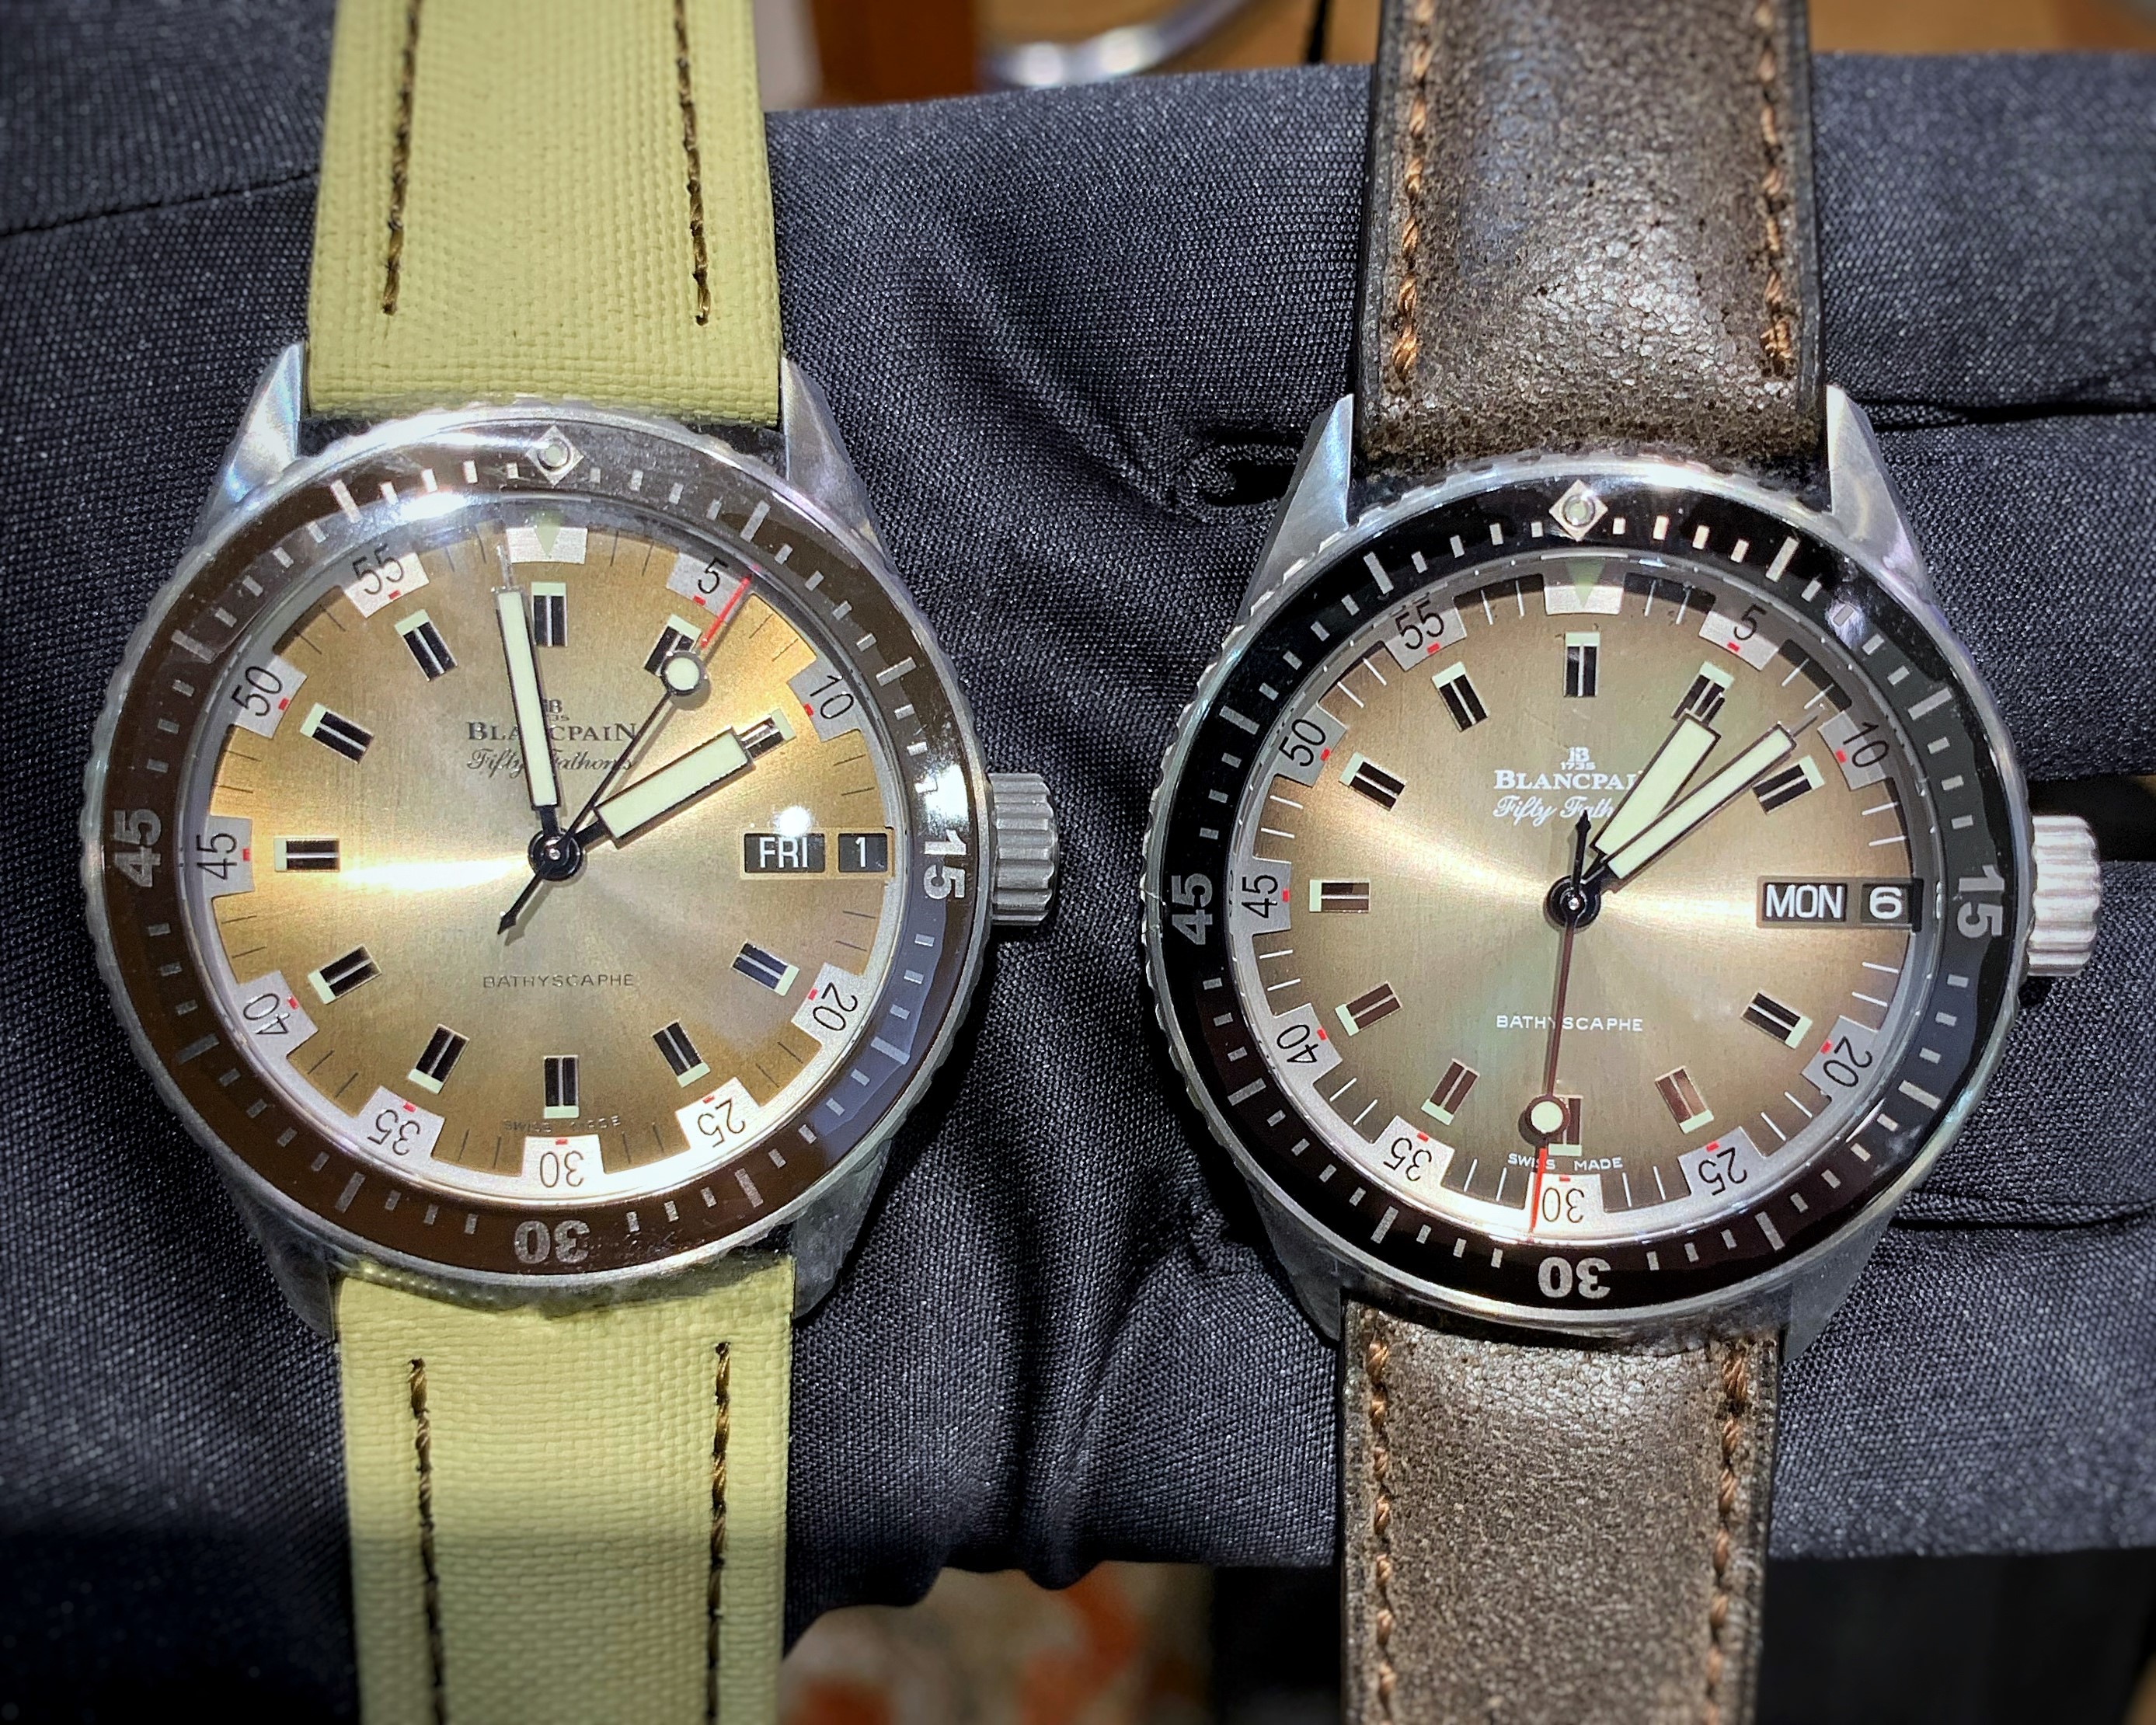 Fifty Fathoms Bathyscaphe Desert Edition and 1970s Day-Date